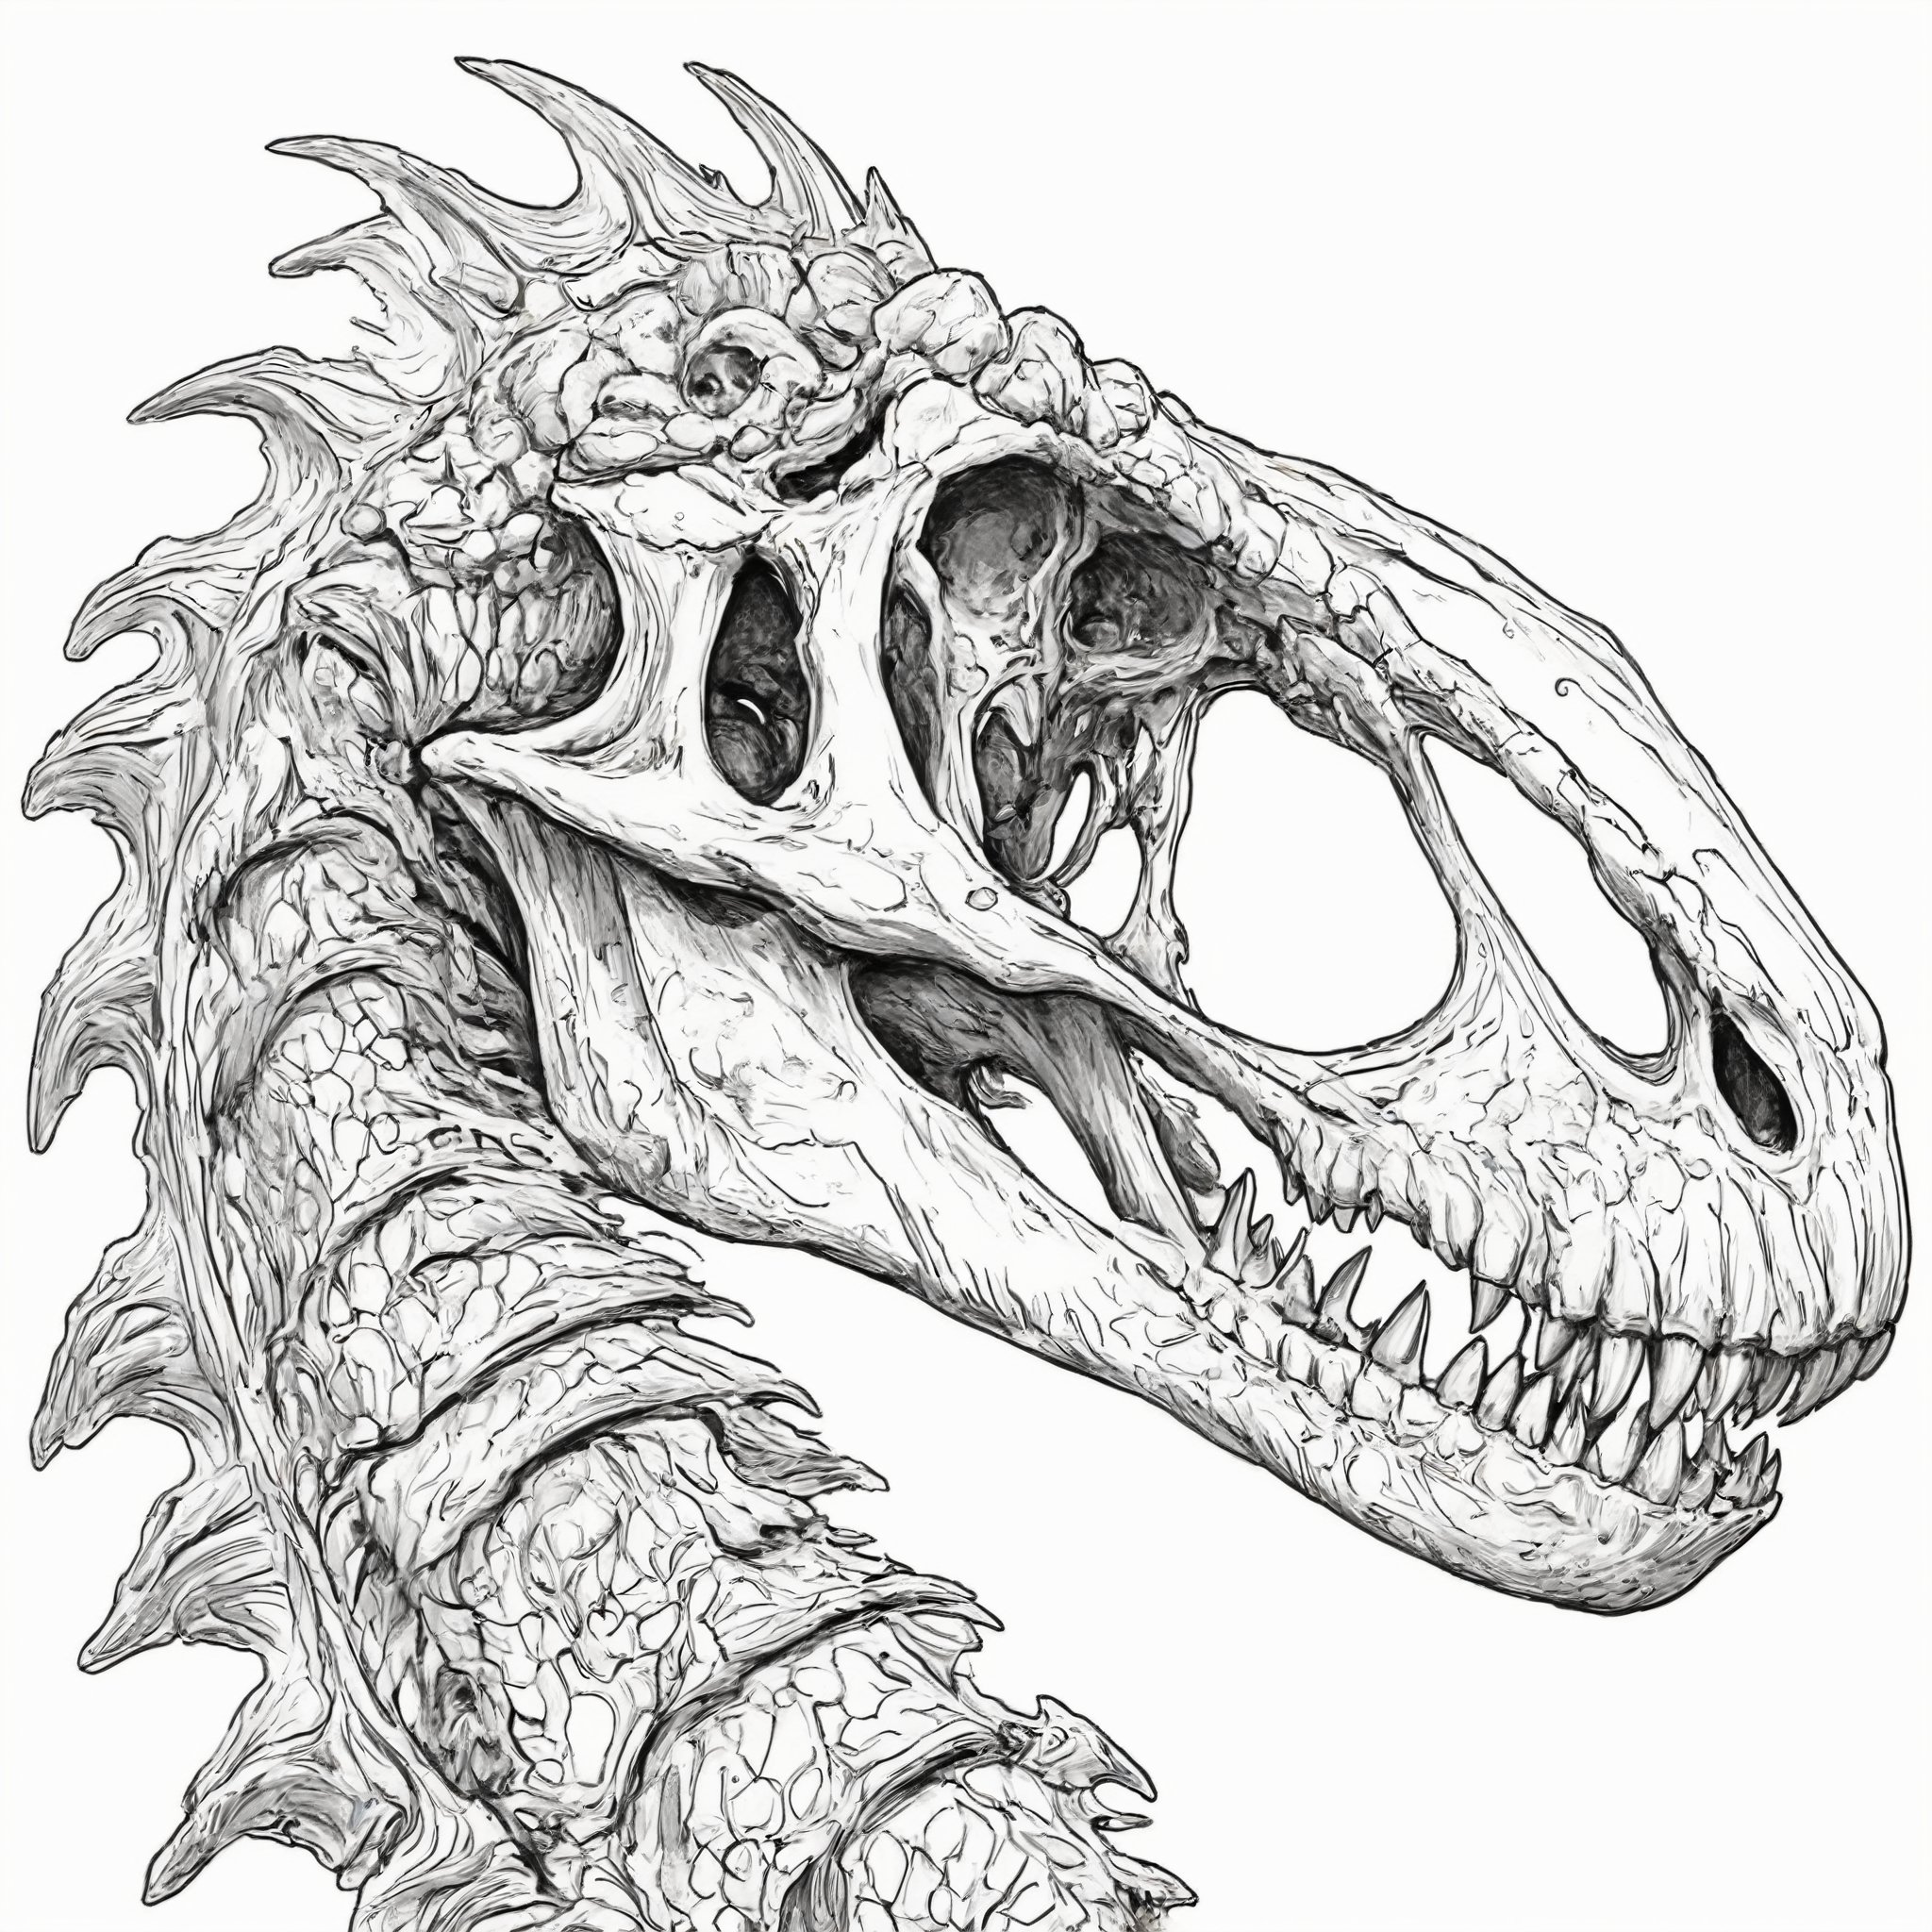 (Line art), exquisite detail that overwhelms the viewer, intricately intertwined dragon bones, and the skull of a tyrannosaurus.,lineart,LineAniAF